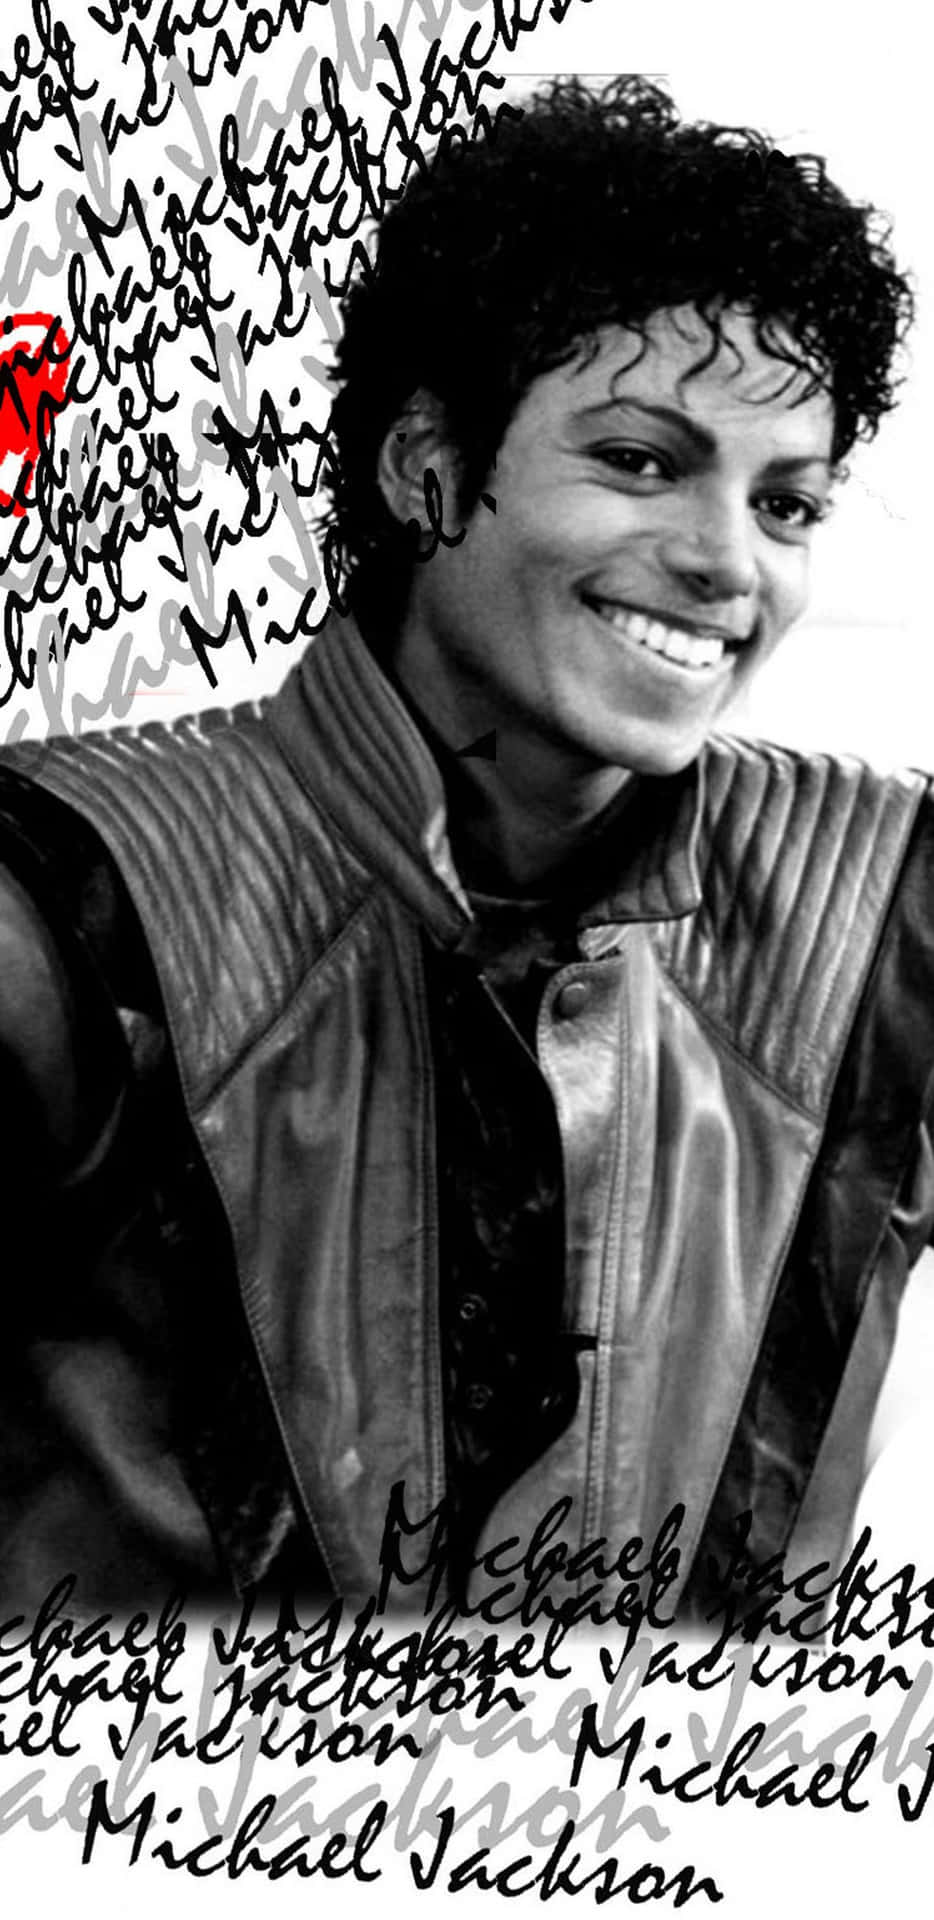 “Stay connected, stay brilliant - show your appreciation for Michael Jackson with the latest iPhone.” Wallpaper